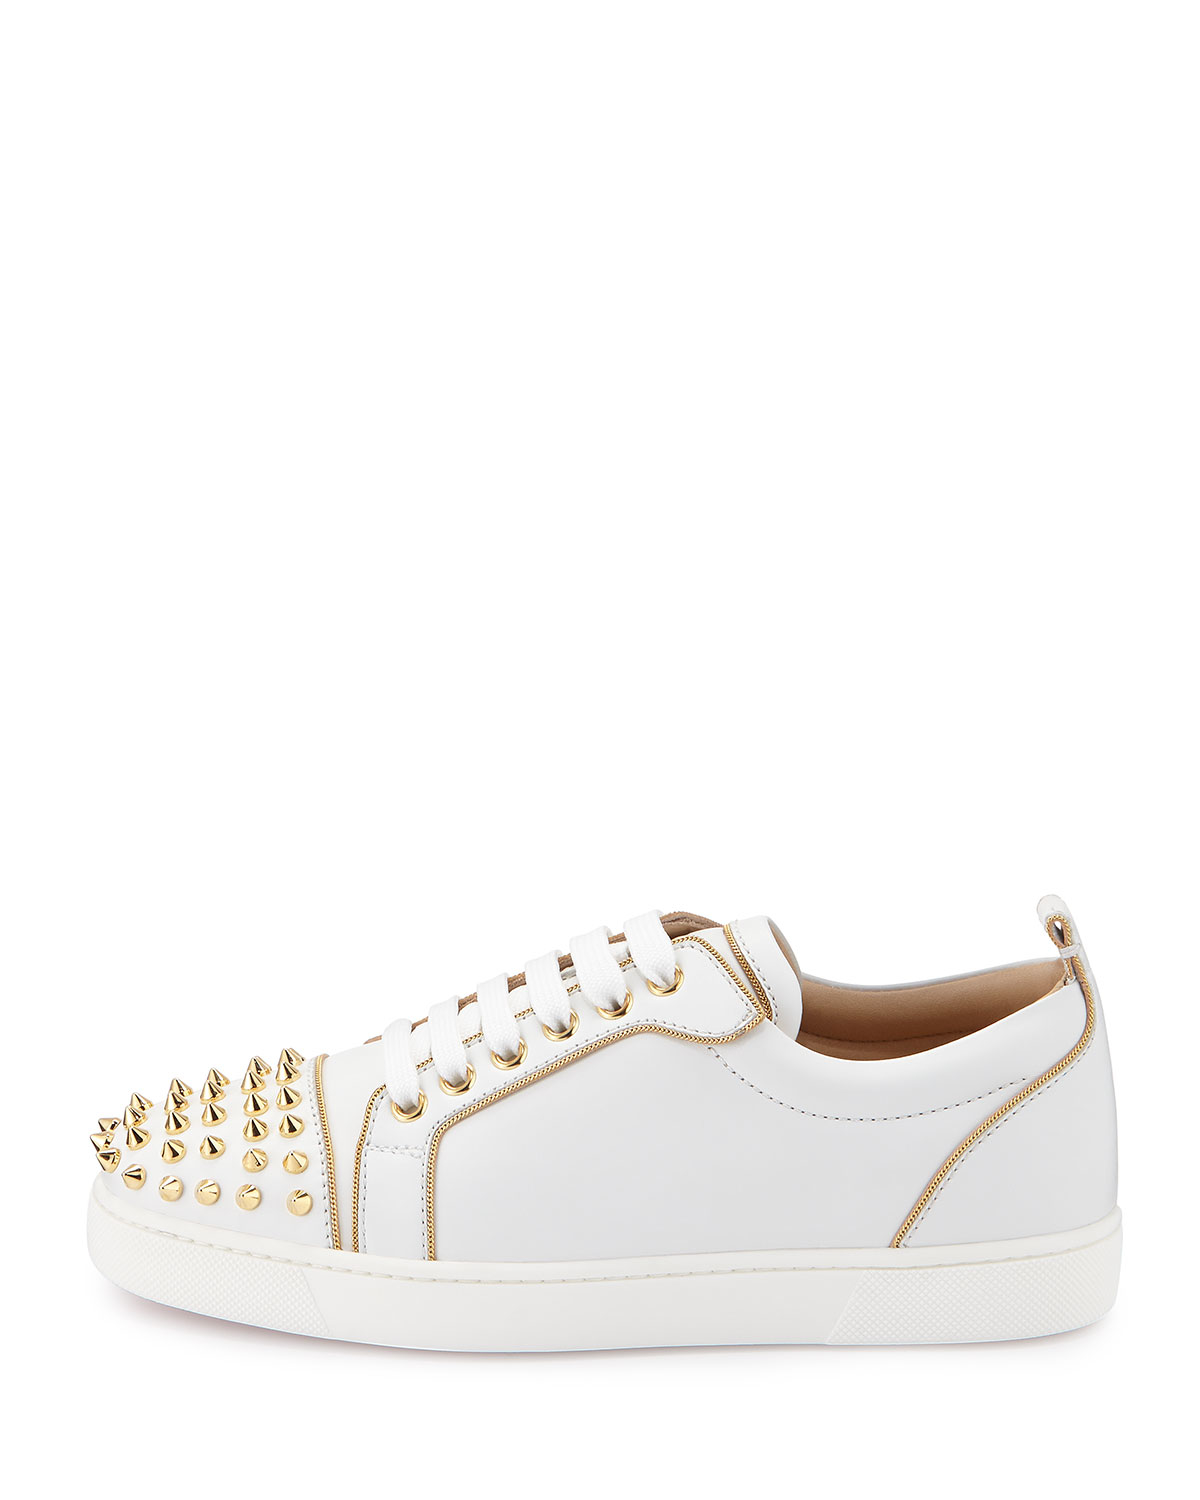 Christian louboutin Rush Spiked Leather Low-Top Sneaker in White | Lyst